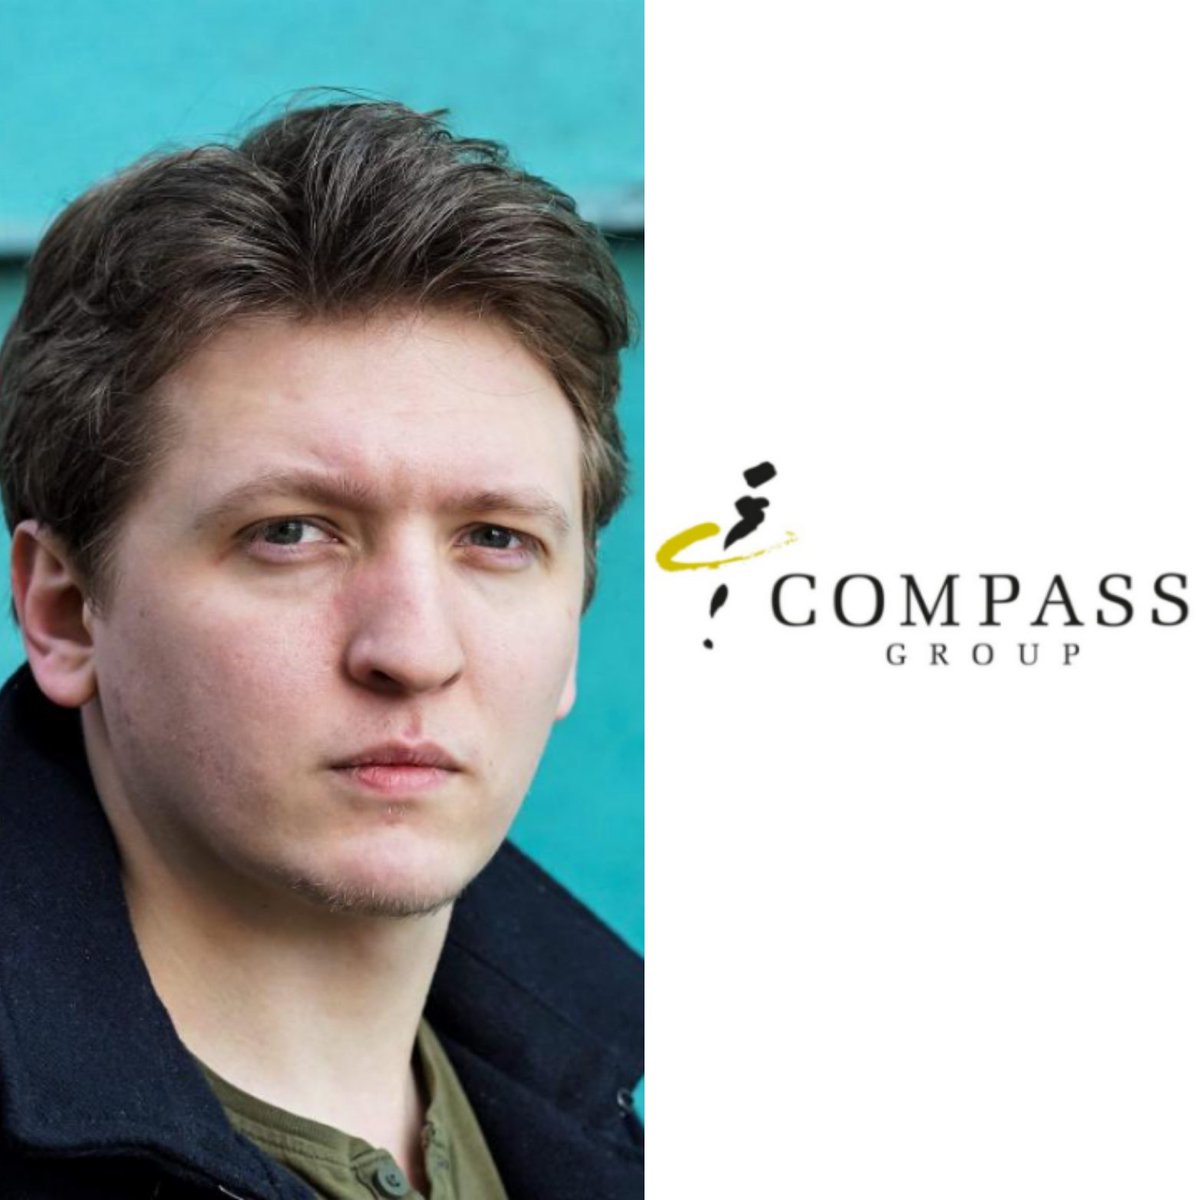 Tuesday now confirmed for shooting a set of internal corporate training videos for @compassgroupuk in Birmingham!!! 🍝  #actor #actorslife #film #films #movie #movies #theatre #stage #casting #compassgroup #corporate #corporatetraining #trainingvideos #training #birmingham